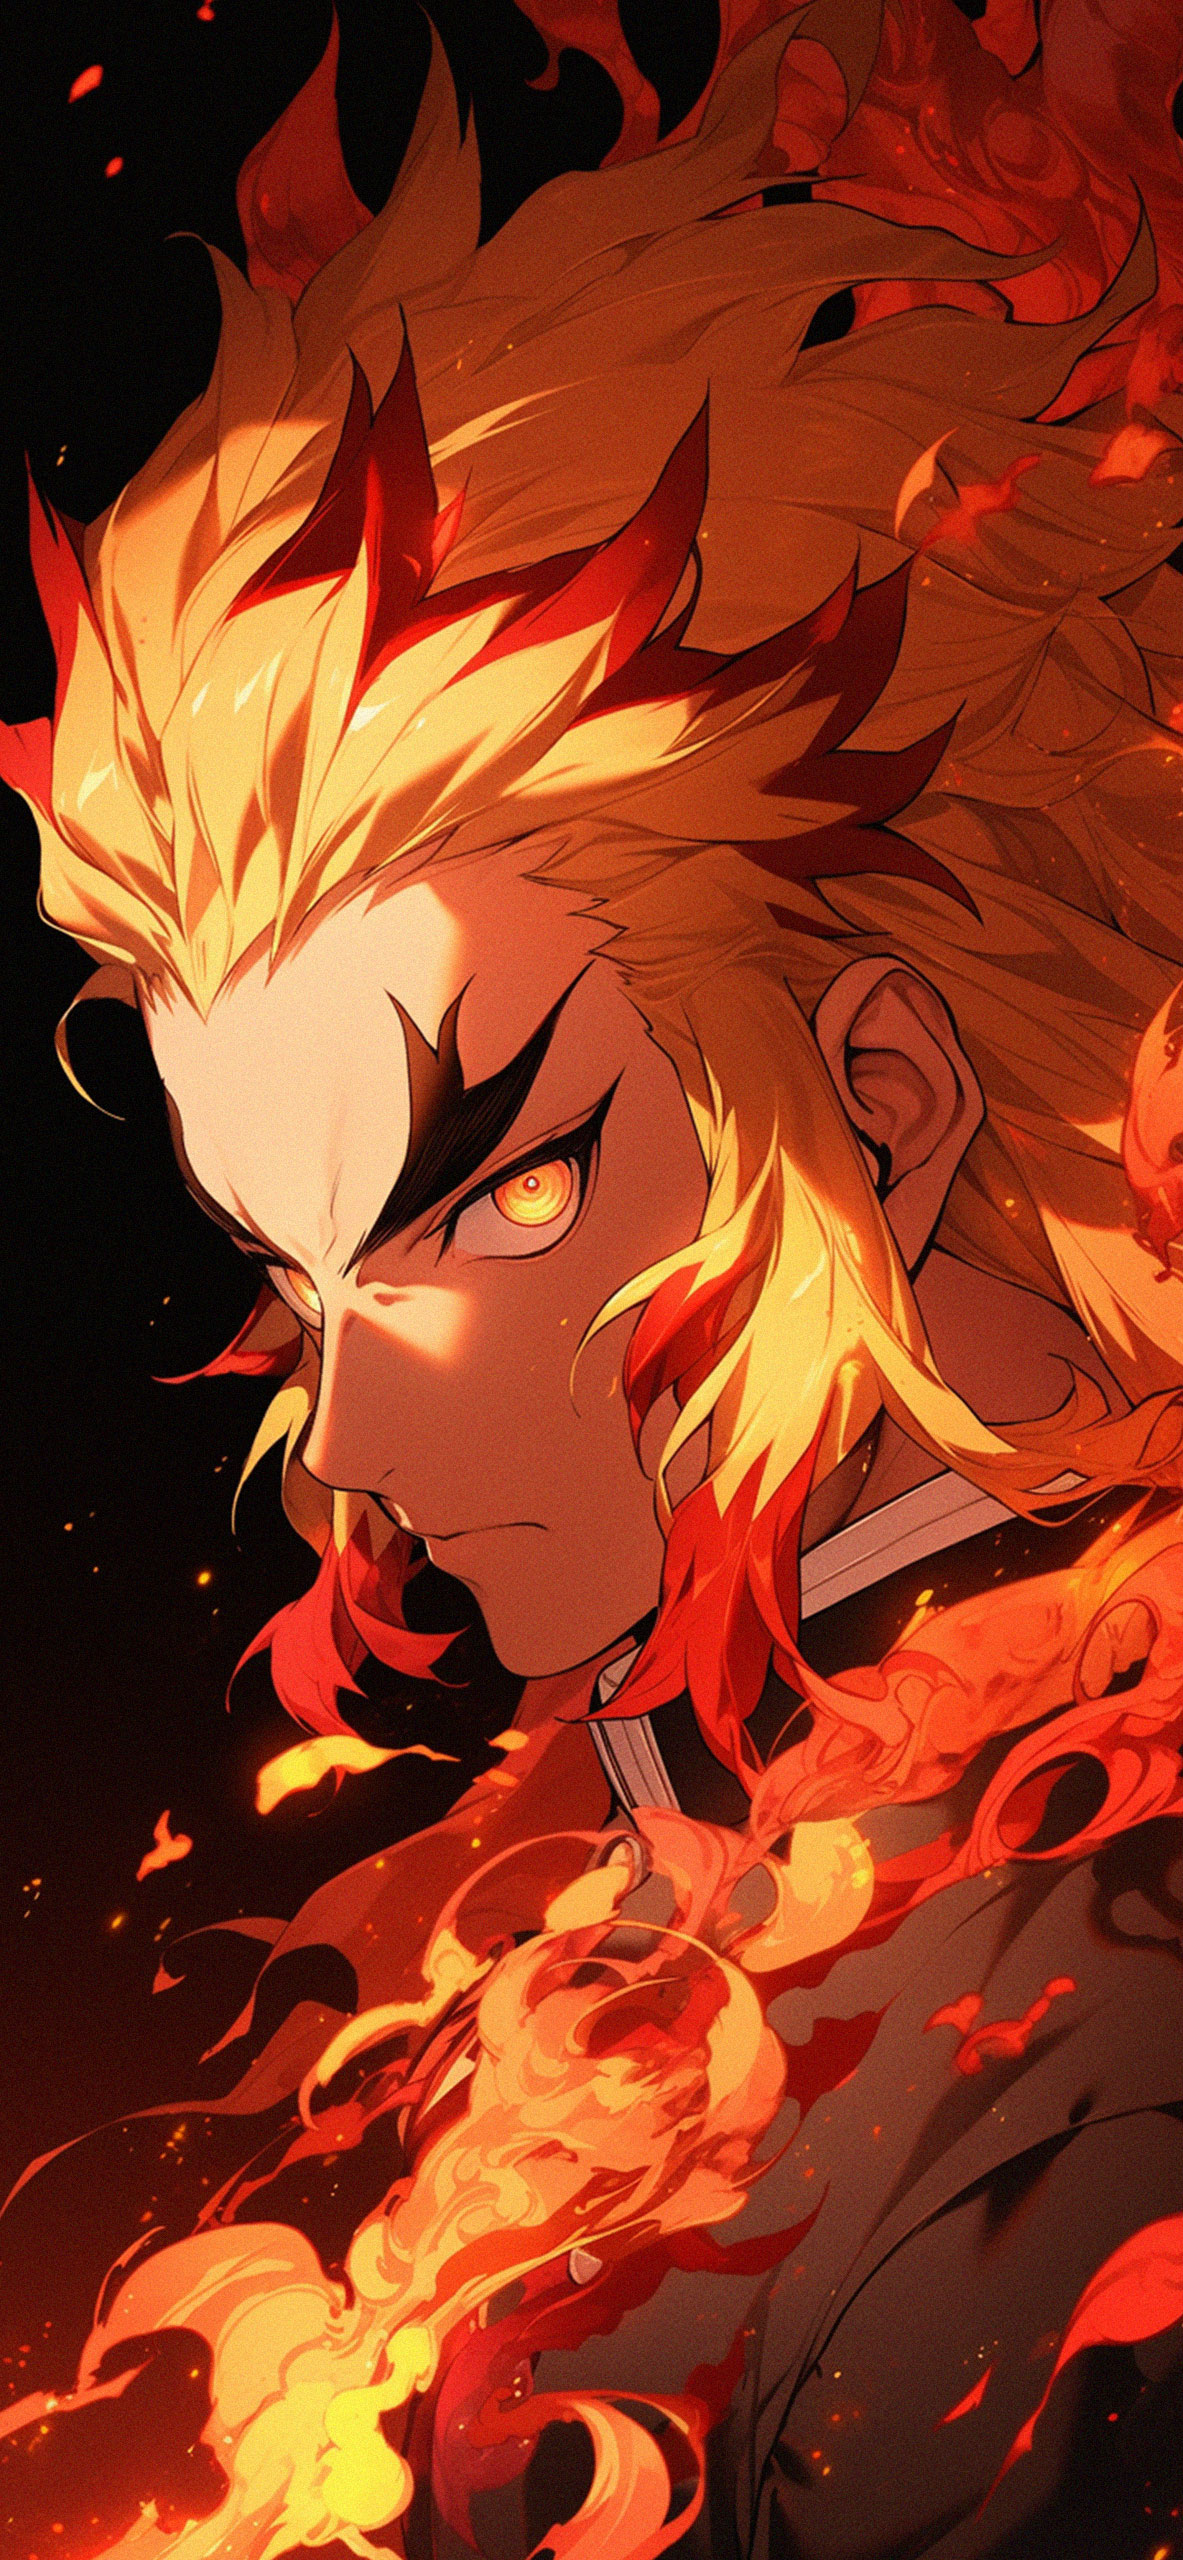 Download Real Fire File HQ PNG Image | FreePNGImg